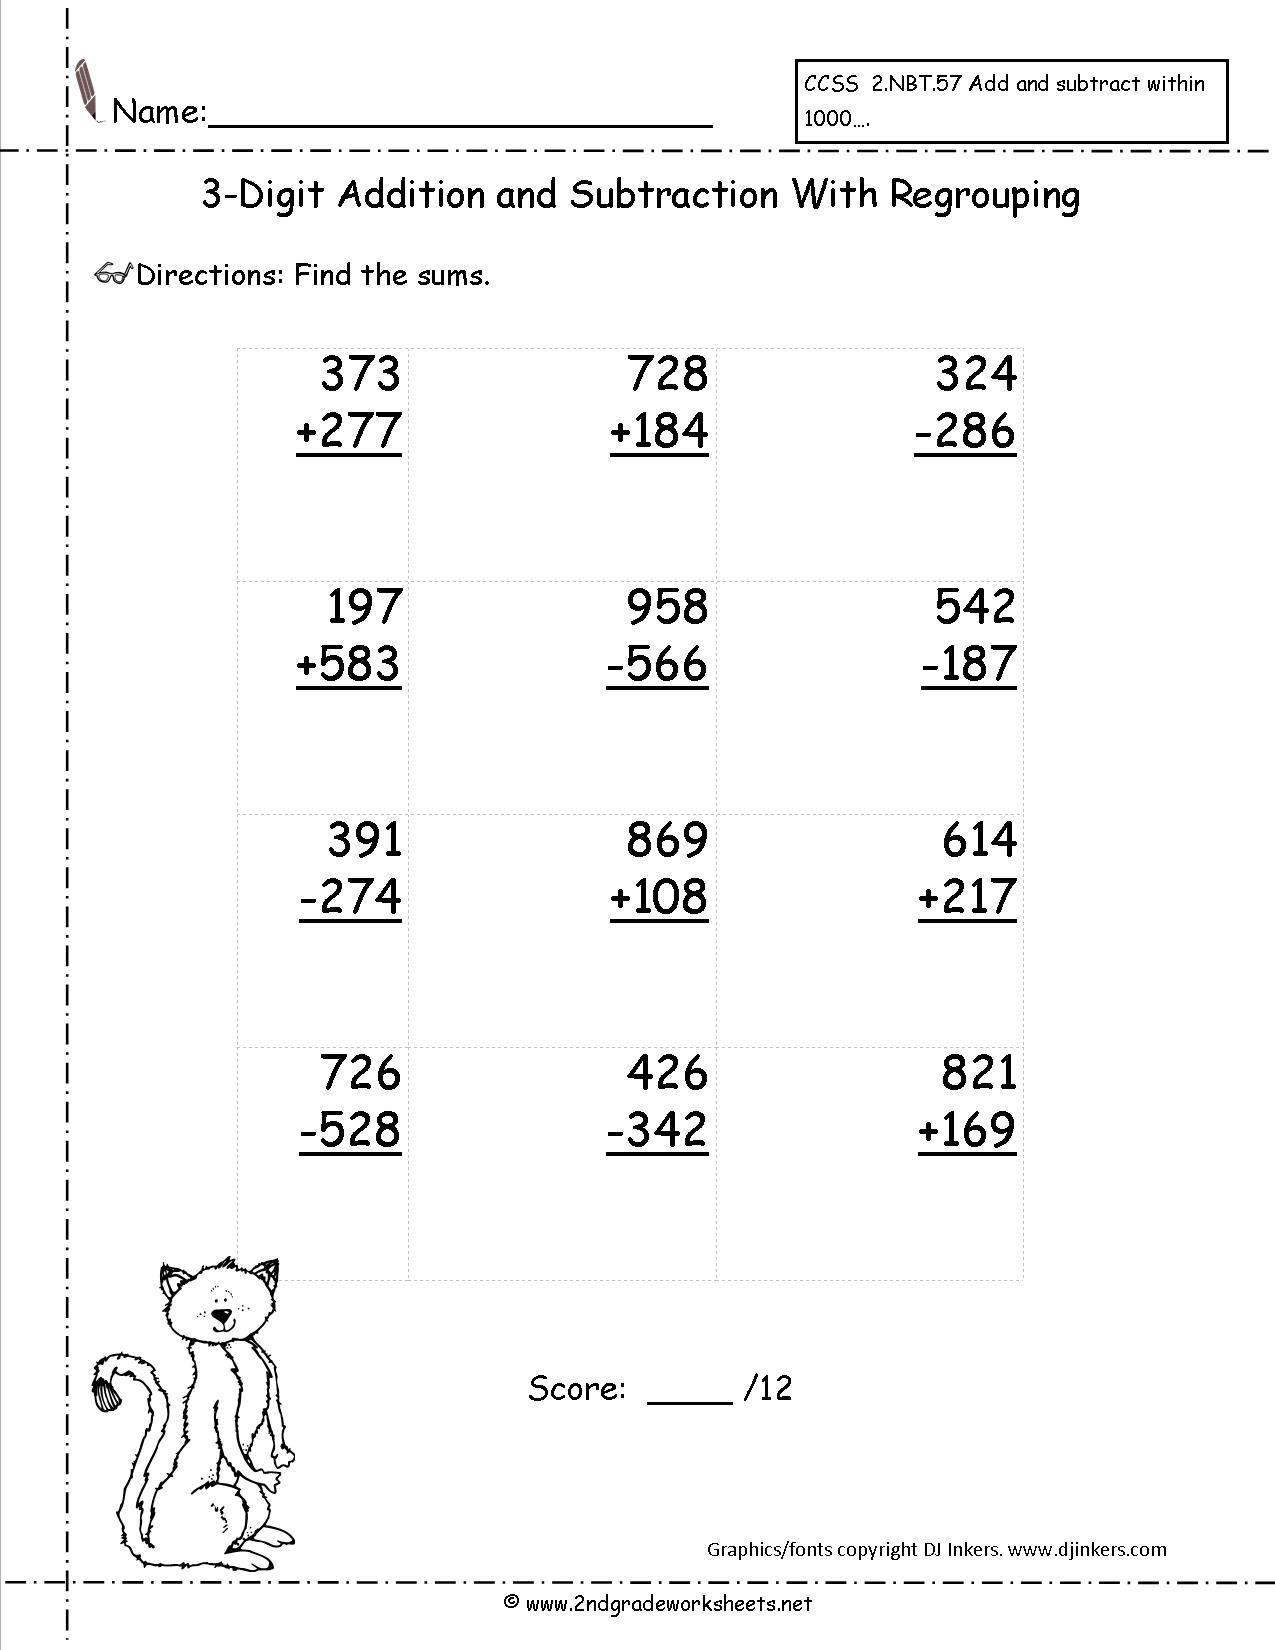 Three Digit Addition And Subtraction Worksheets From The Teacher&amp;#039;s Guide - Free Printable Addition And Subtraction Worksheets